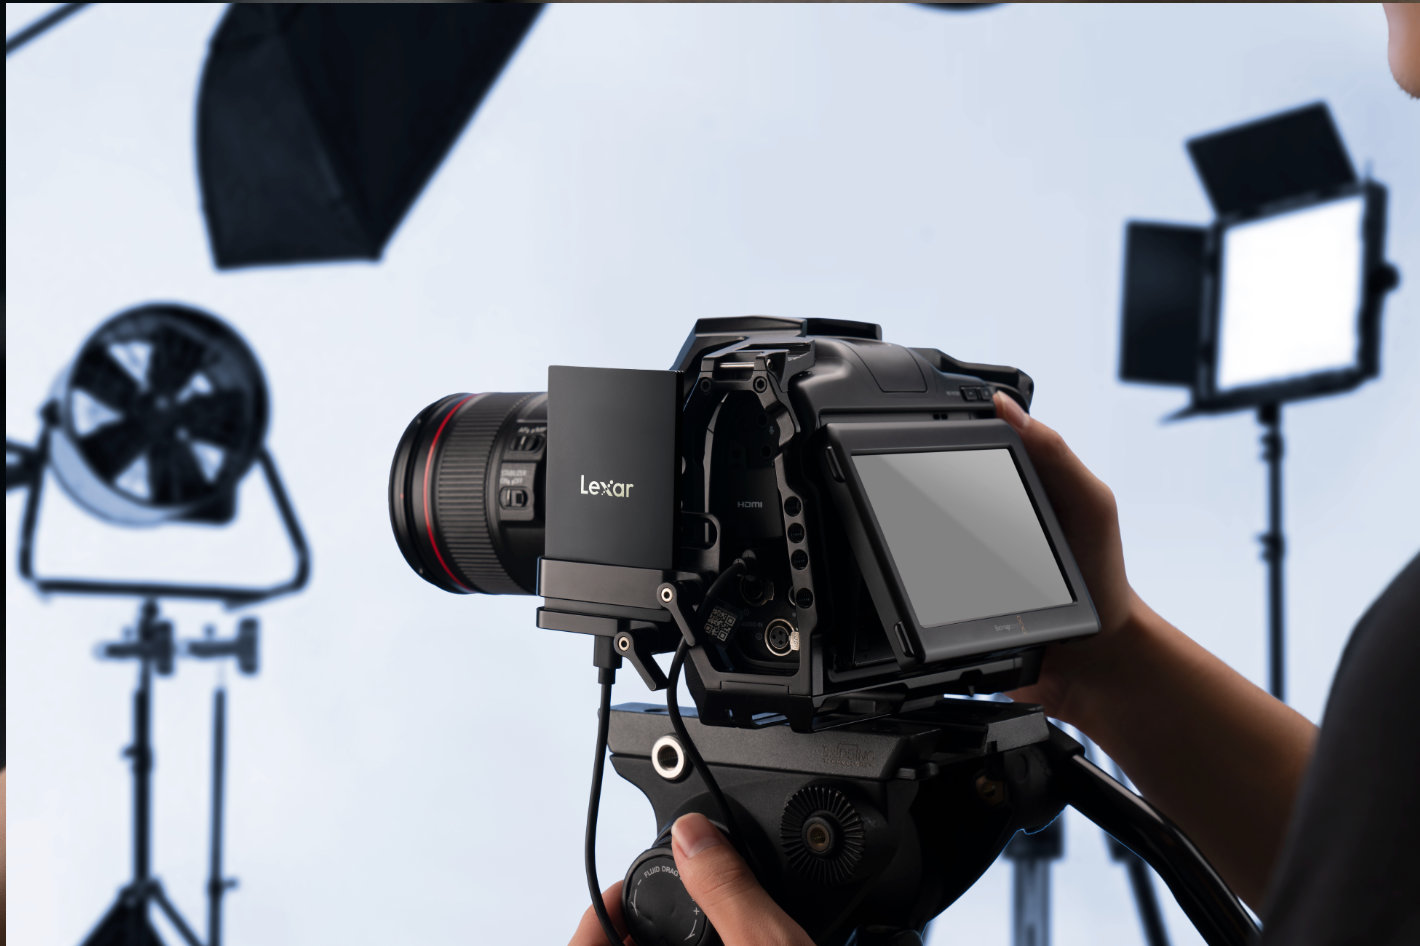 ARMOR 700 and SL500: Lexar SSDs for content creators